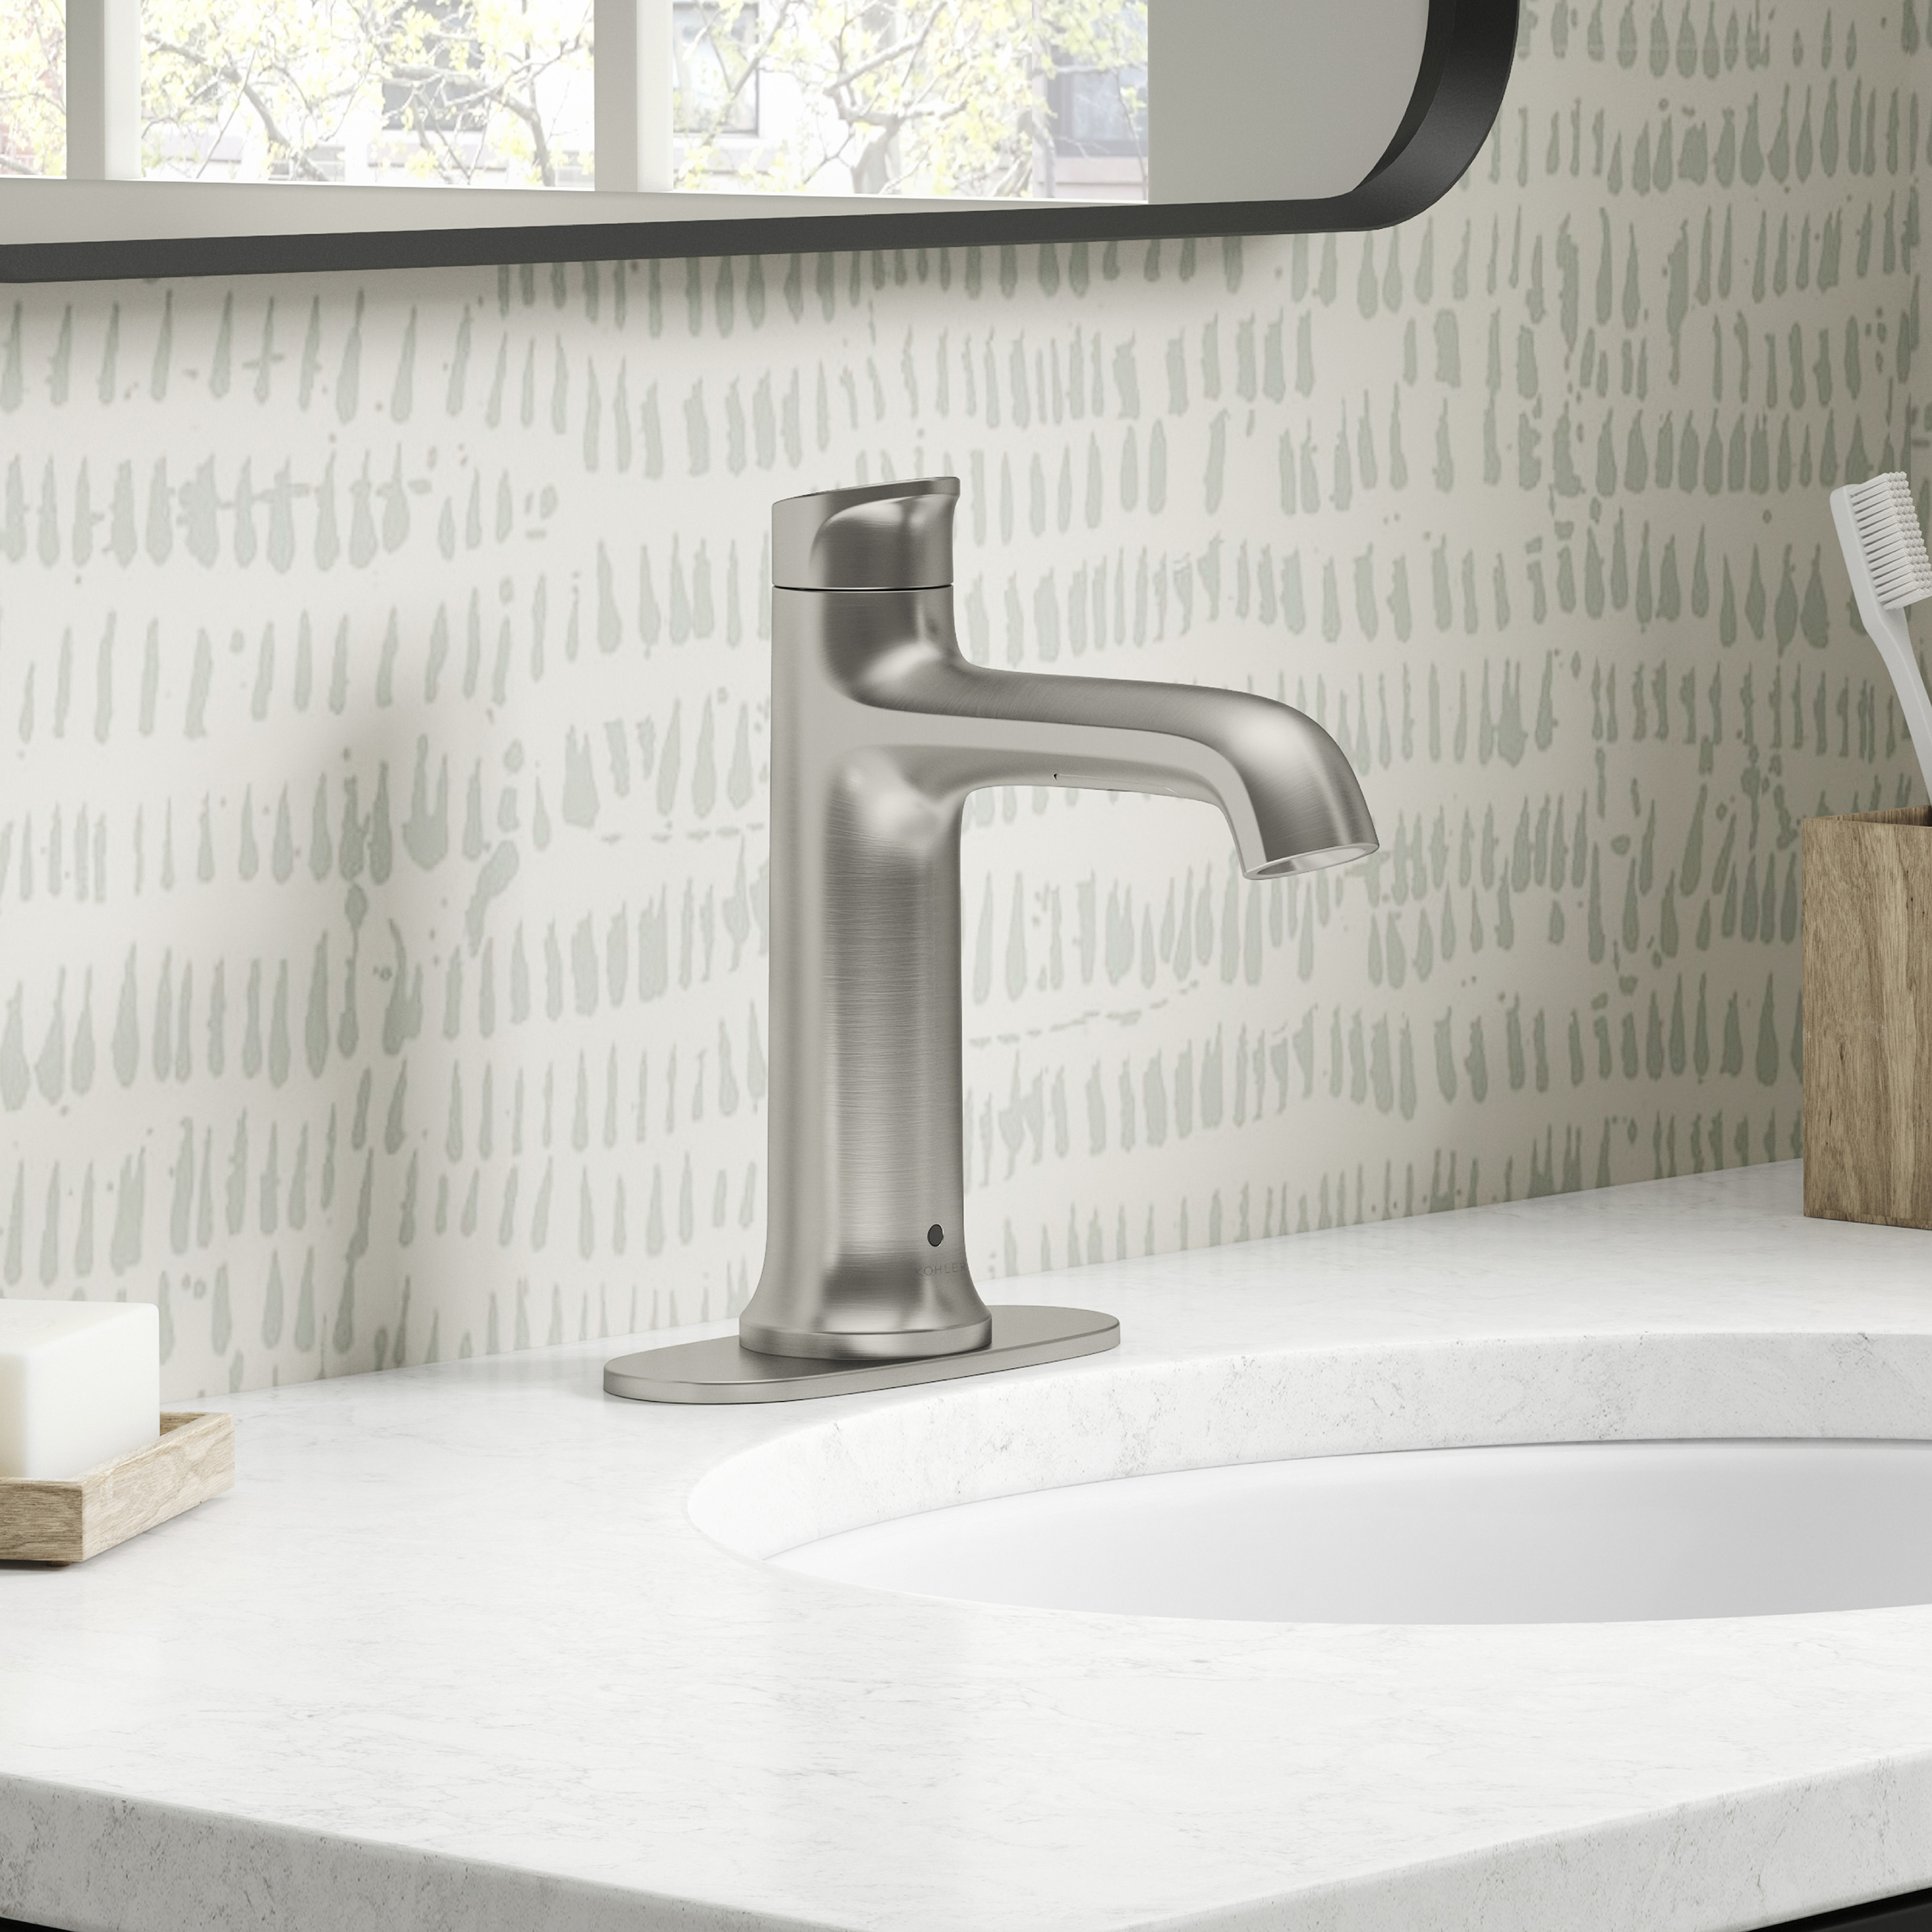 KOHLER Touchless Residential Bathroom Faucet functions with a simple wave of the hand, offers temperature control and operates by battery, offering an easy tech upgrade.